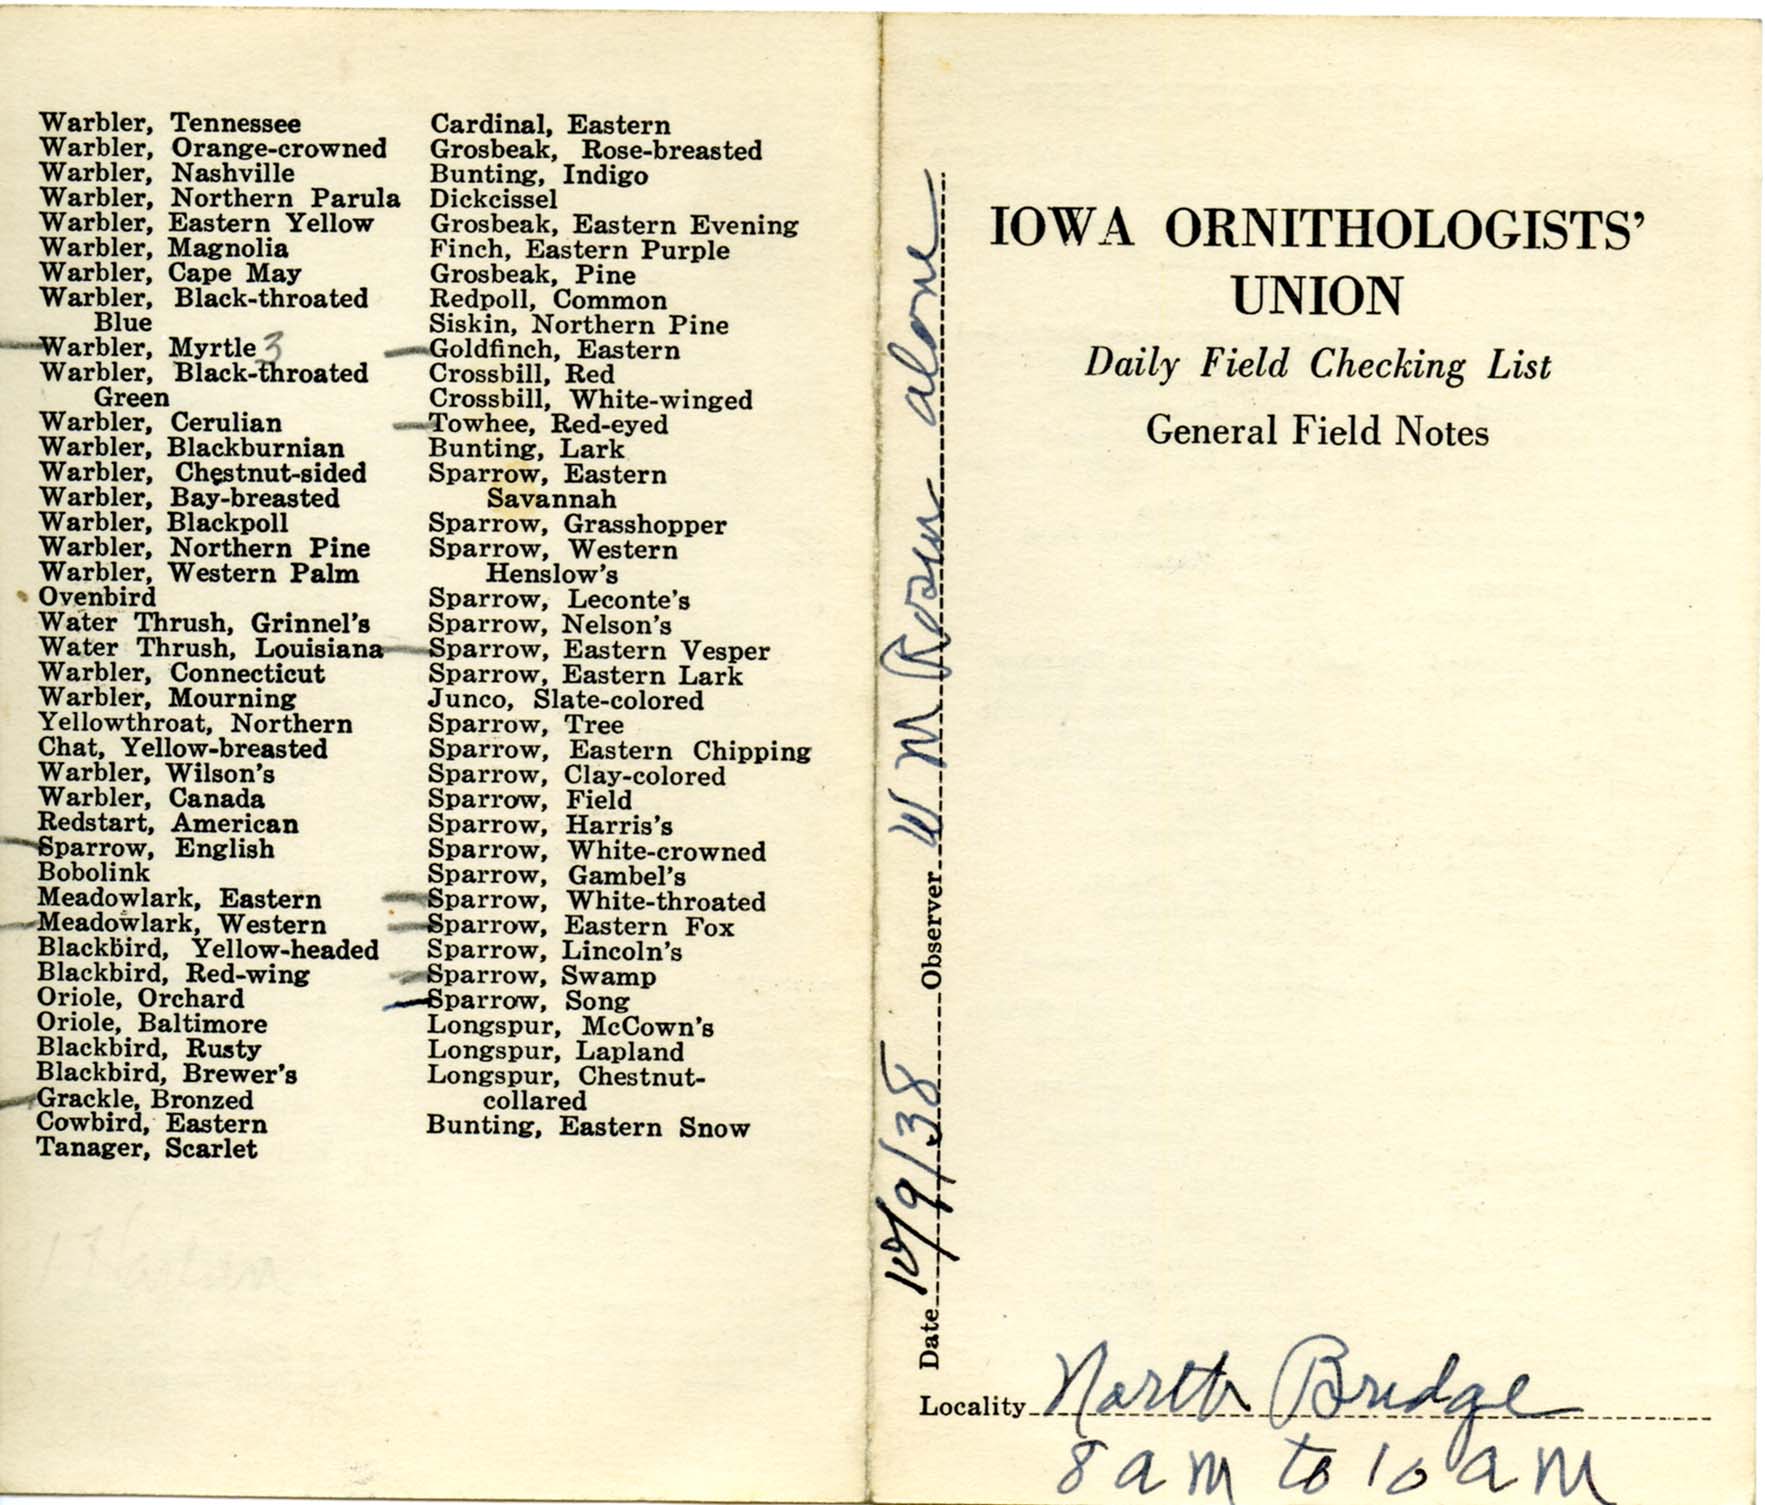 Daily field checking list by Walter Rosene, October 9, 1938